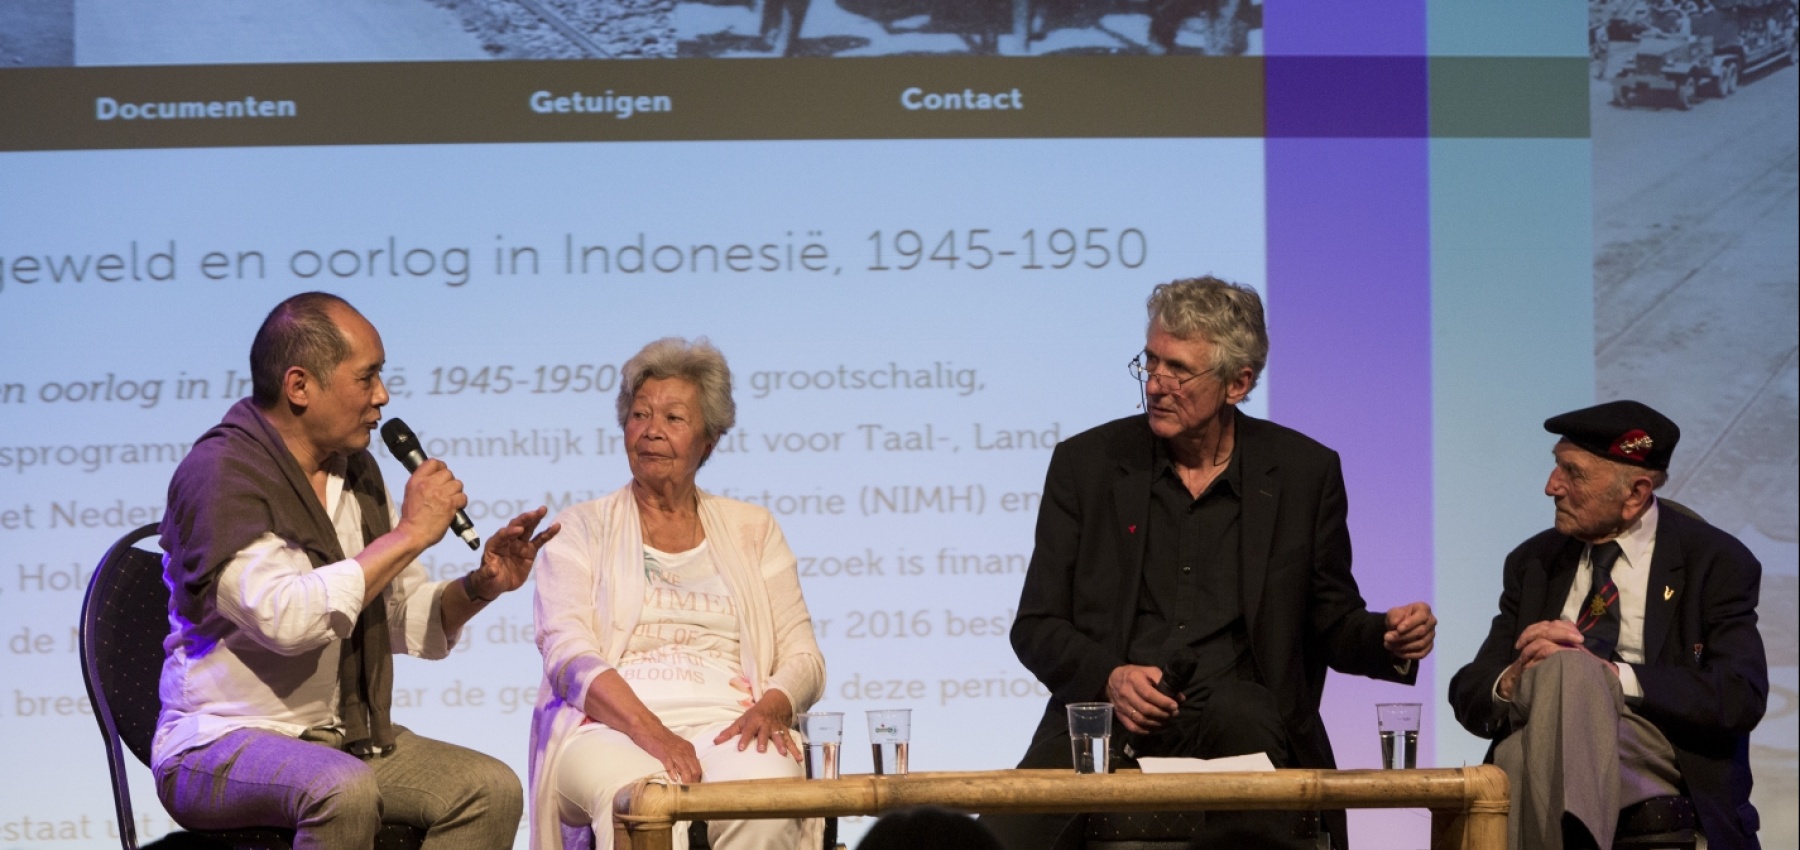 Peter Bouman, Rita Young, Fridus Steijlen and Ad Jansen during the kick-off of witnesses and contemporaries at the Tong Tong Fair. Beeld: Tong Tong Fair/Henriette Guest